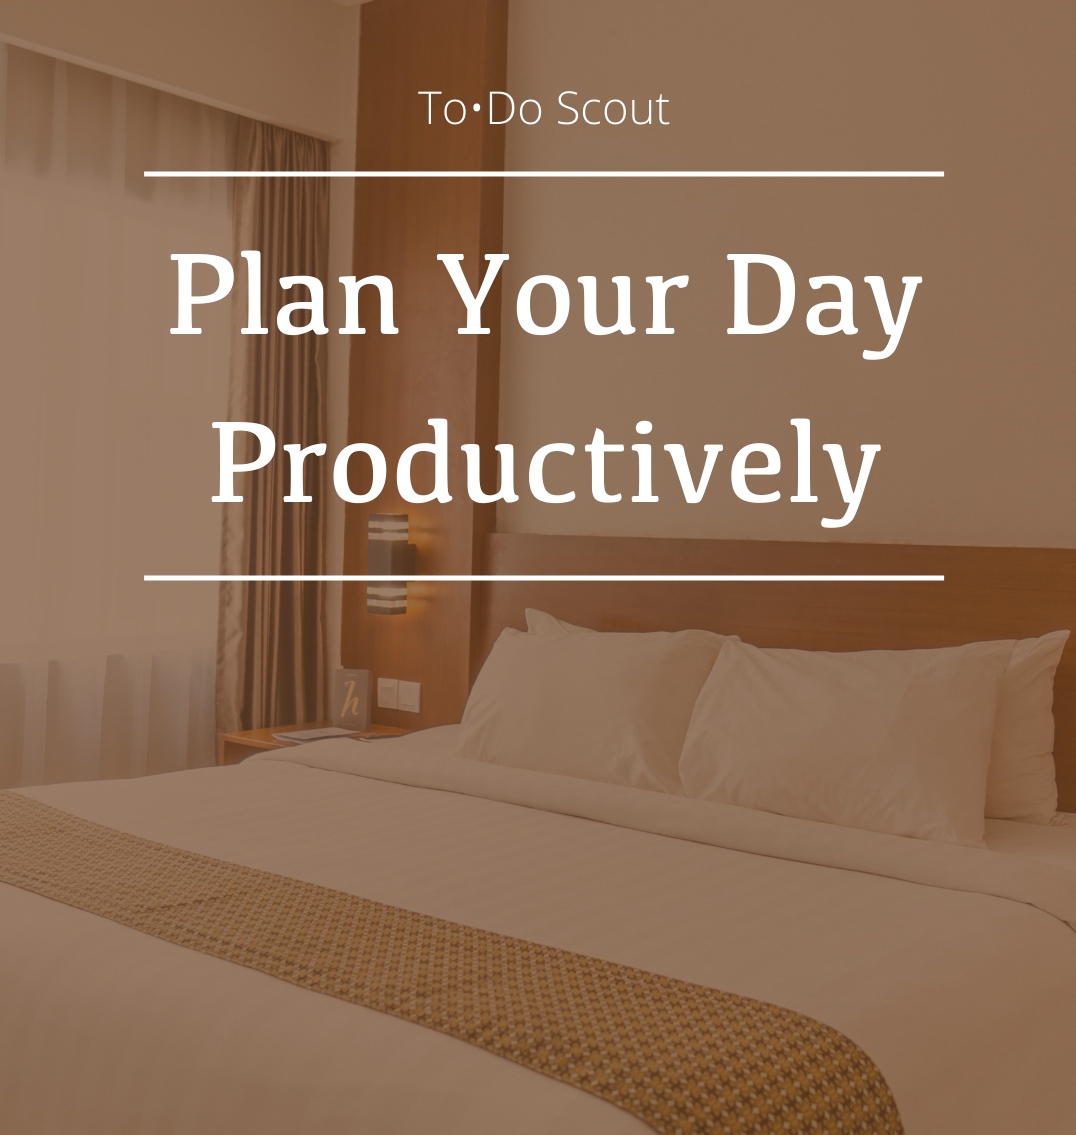 how-to-plan-your-day-productively-to-do-scout